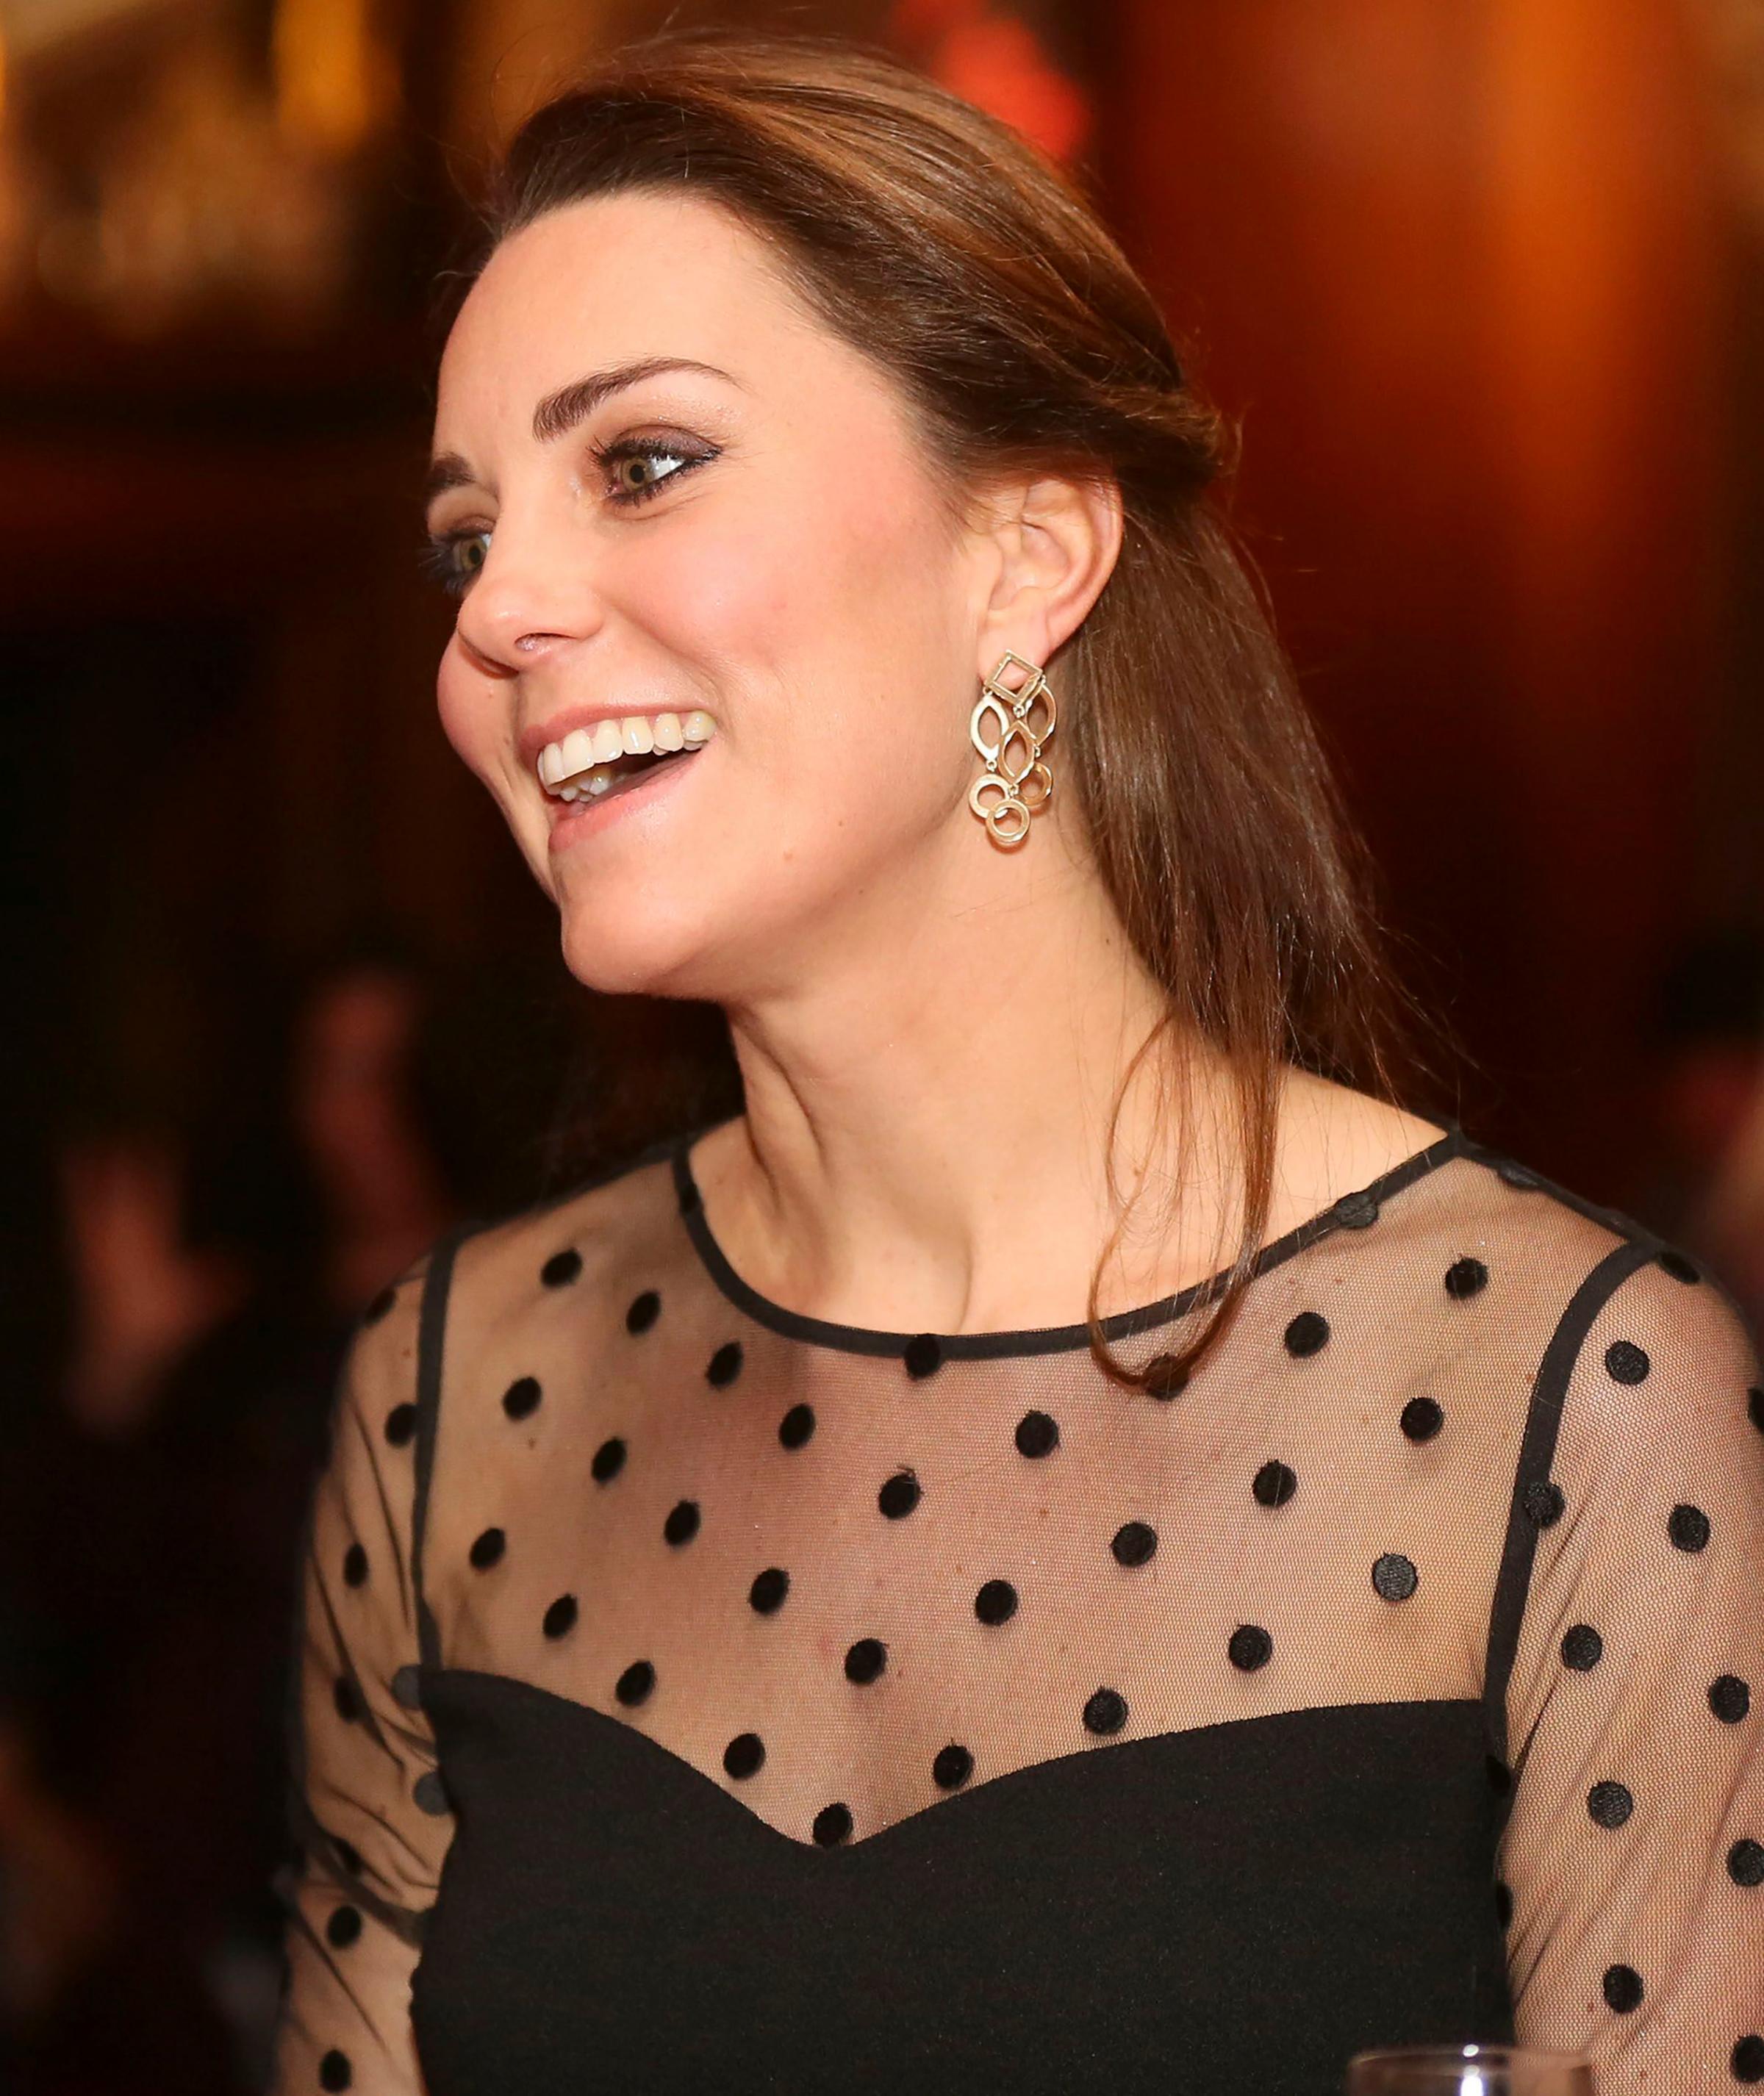 The Duchess of Cambridge attends the Place2be Wellbeing in Schools Award